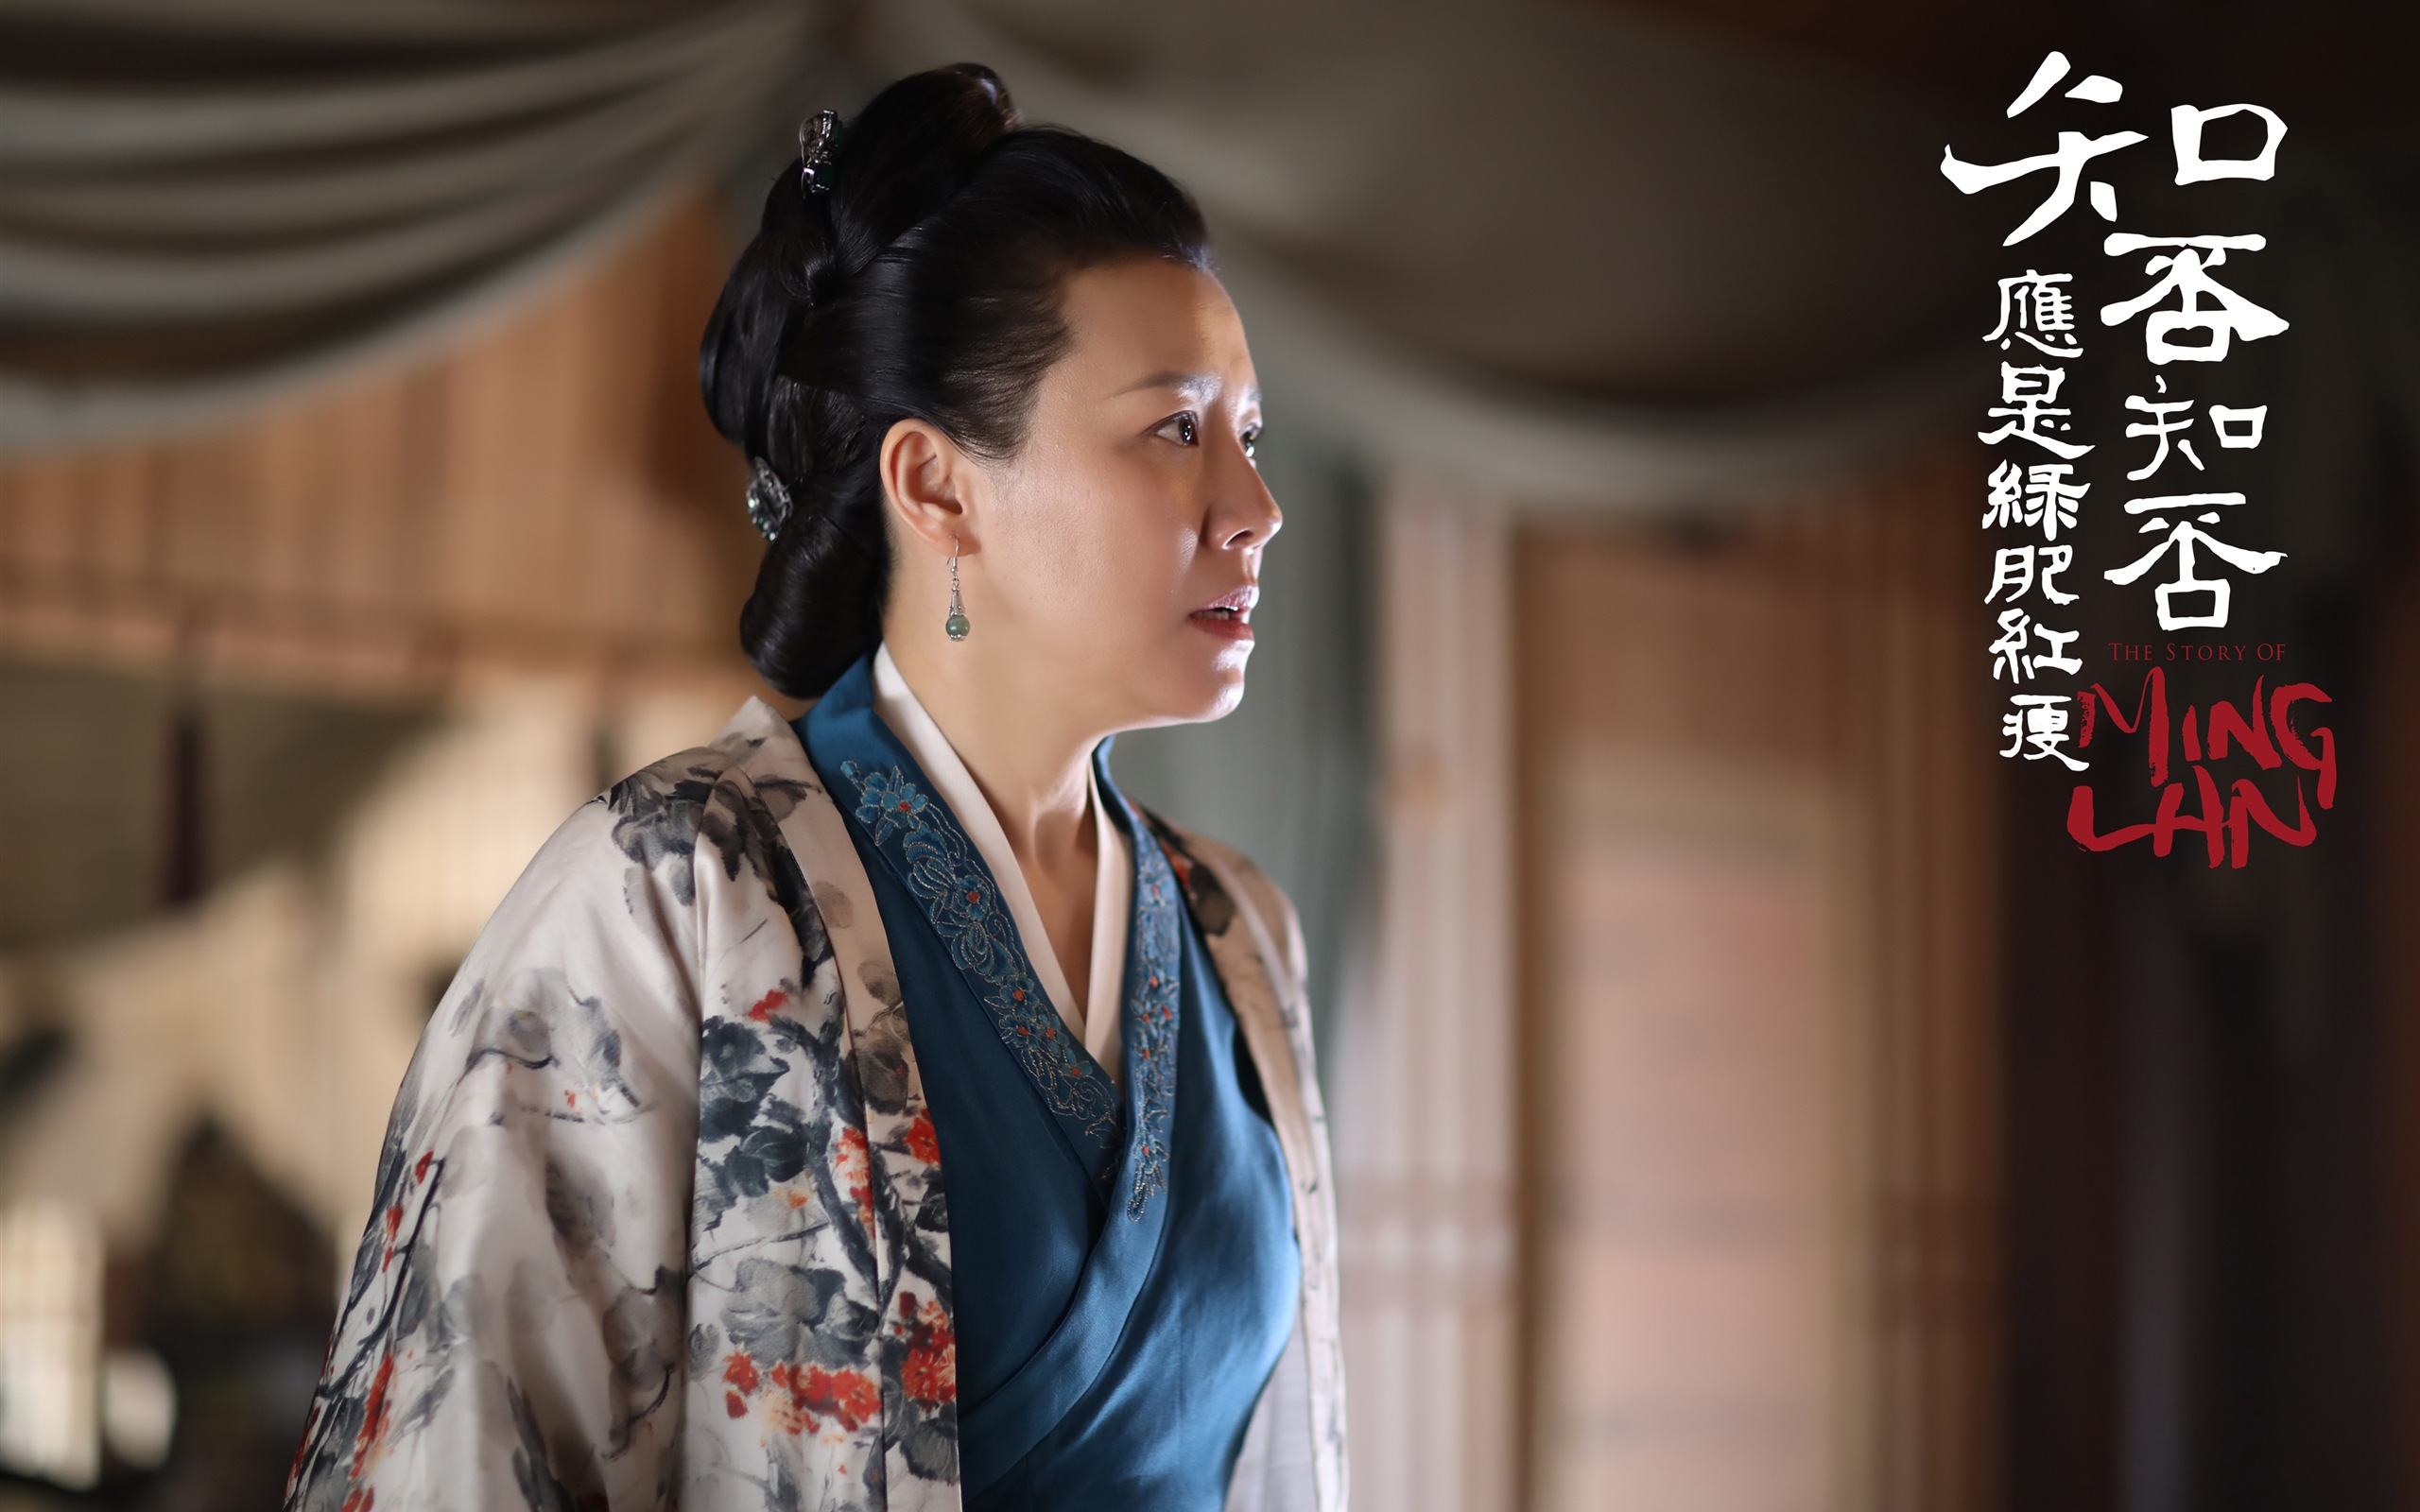 The Story Of MingLan, TV series HD wallpapers #3 - 2560x1600